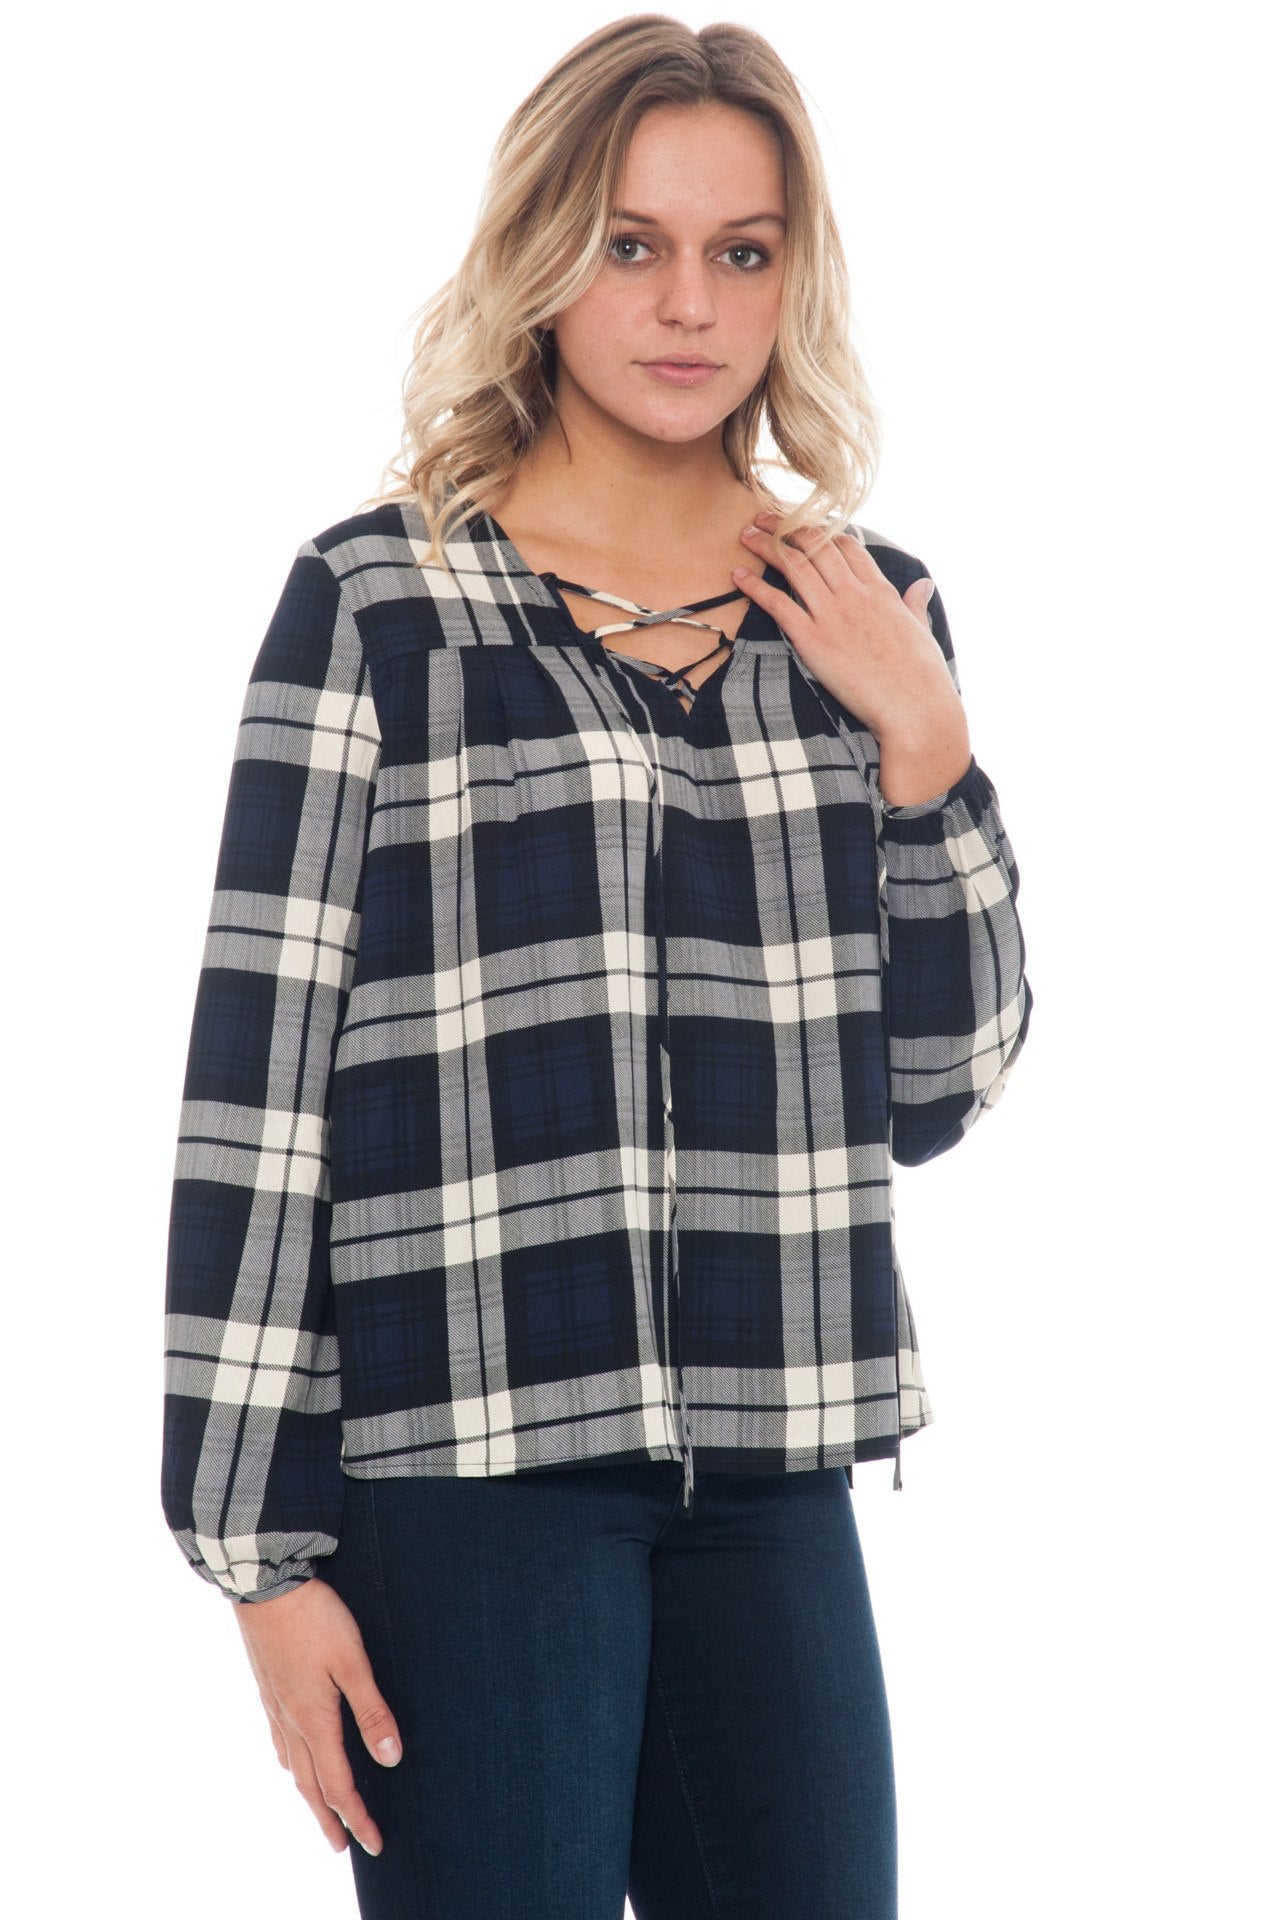 Blouse - Plaid Lace Up Front Top By Everly